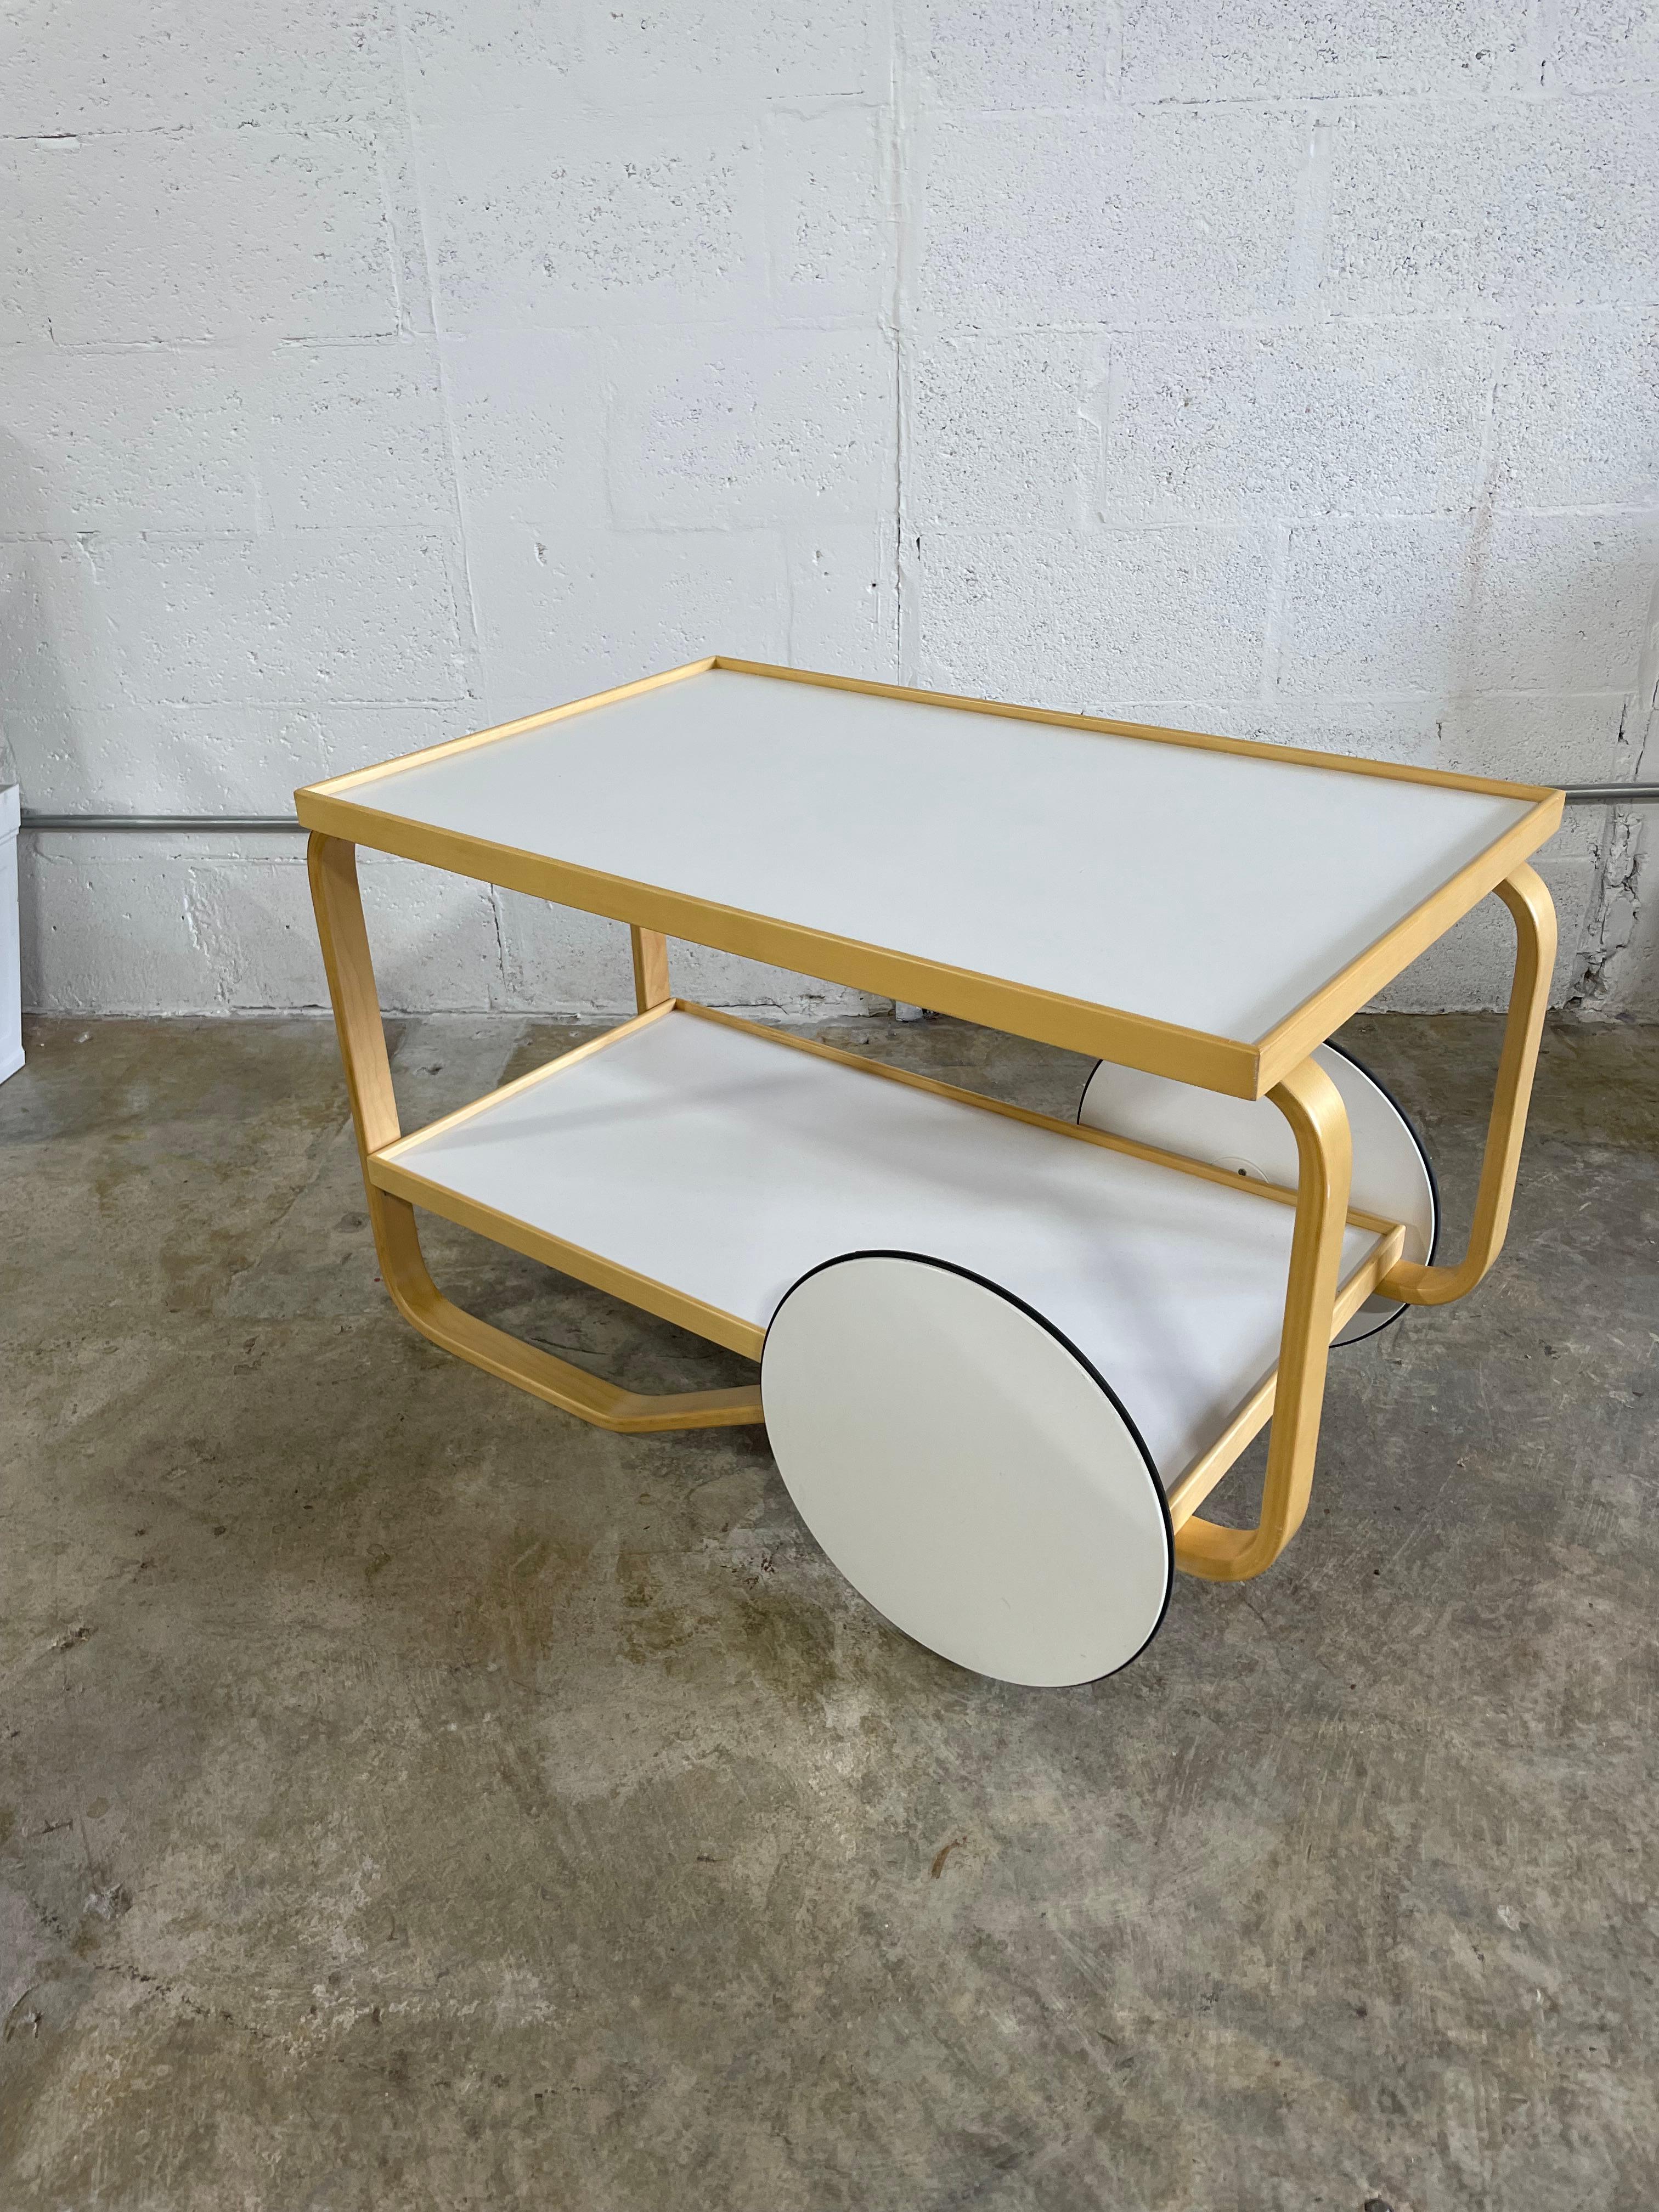 901 Serving Trolley by Alvar Aalto. Authentic, stamp on bottom. 90s. Birchwood frame and linoleum covered trays. 35w 20d 20h